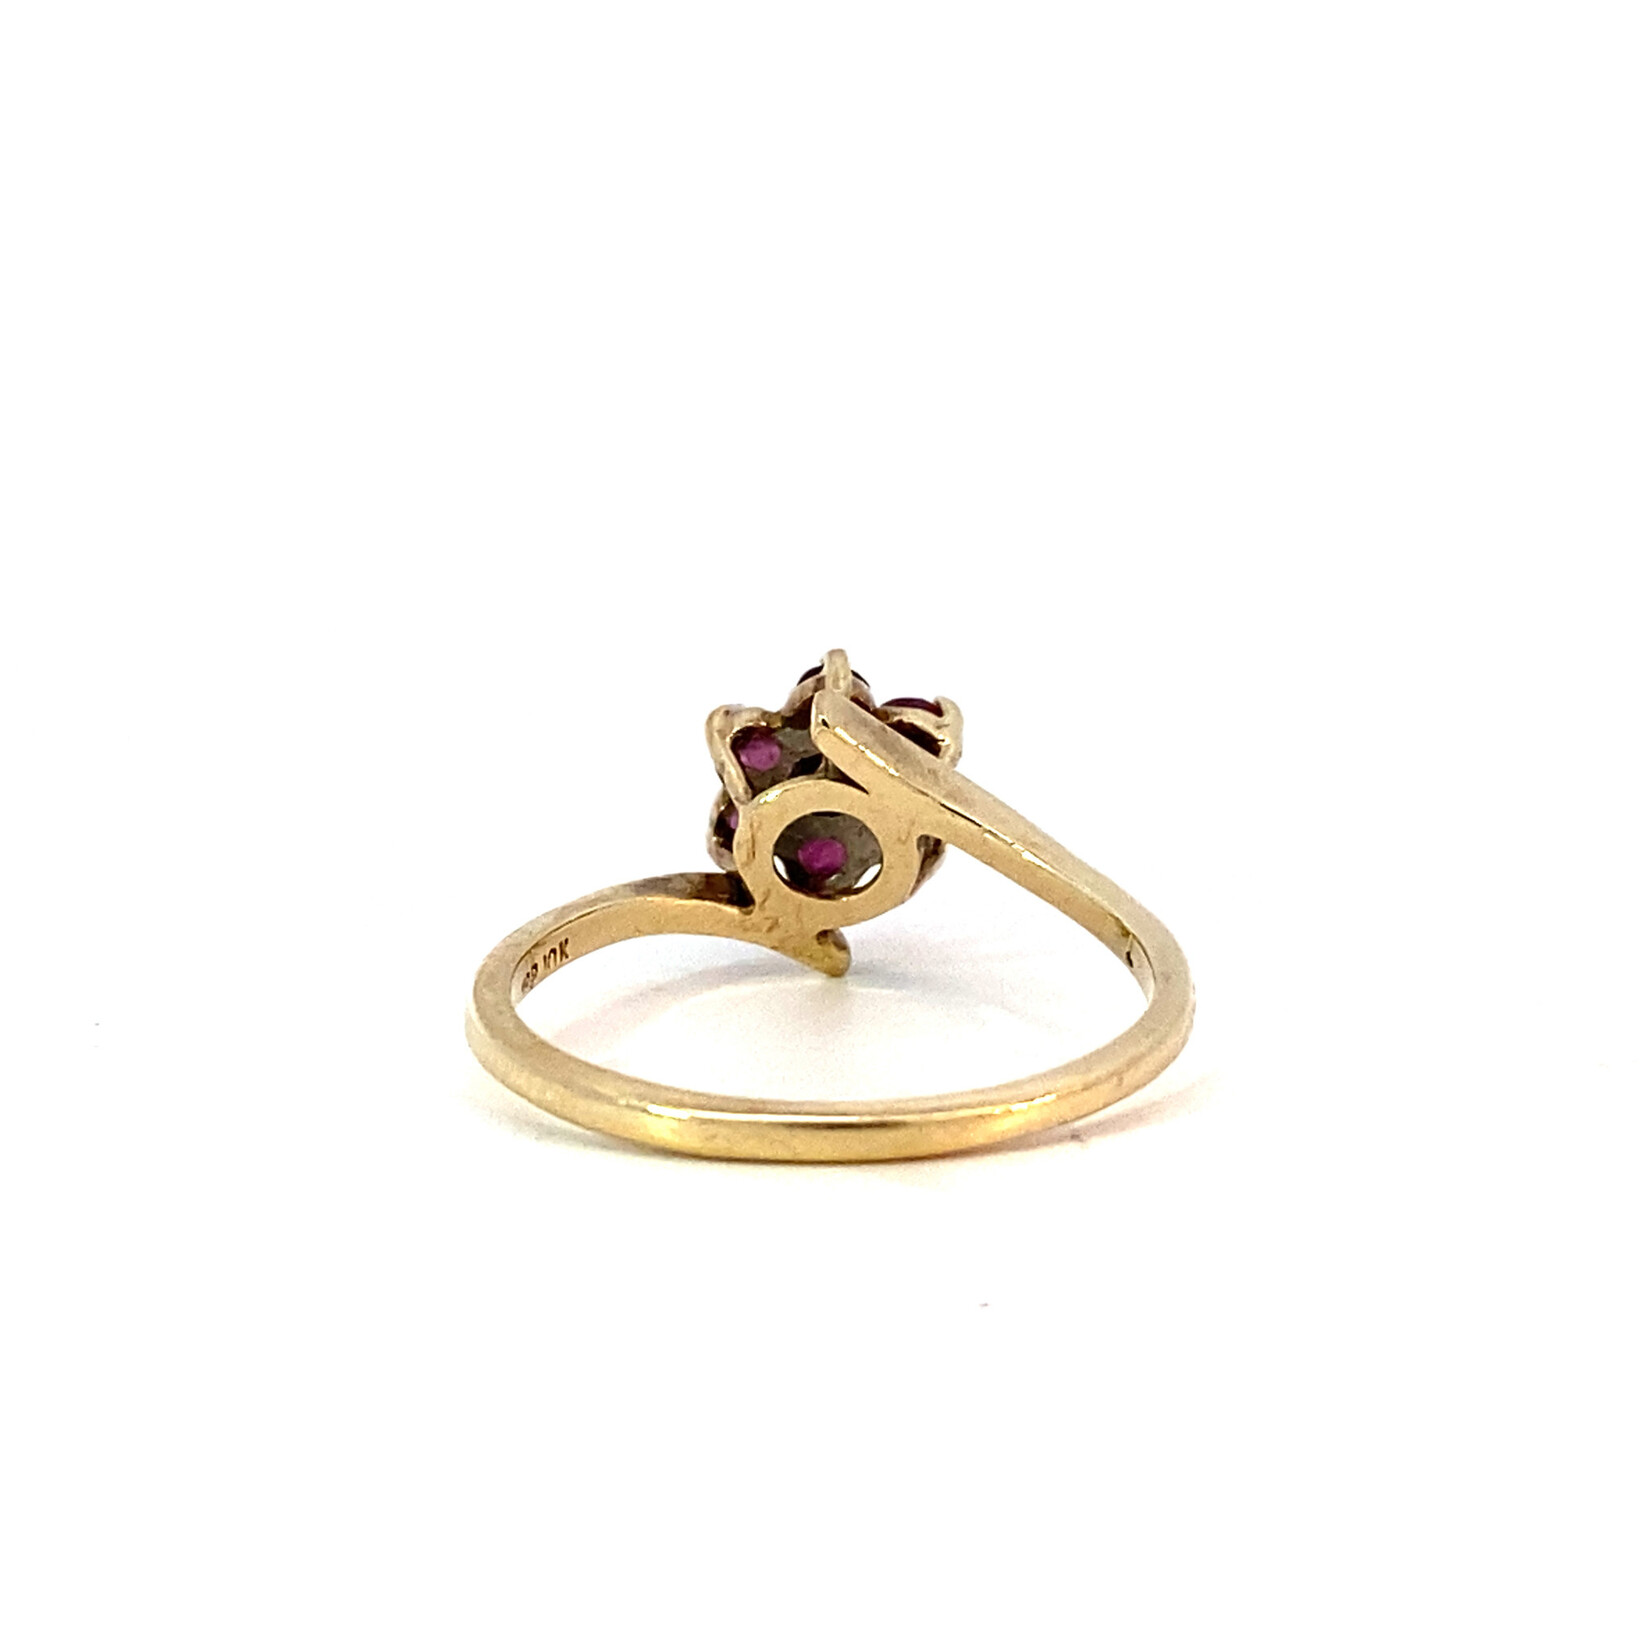 10K Yellow Gold Red & White Stone Flower Ring size 5.75